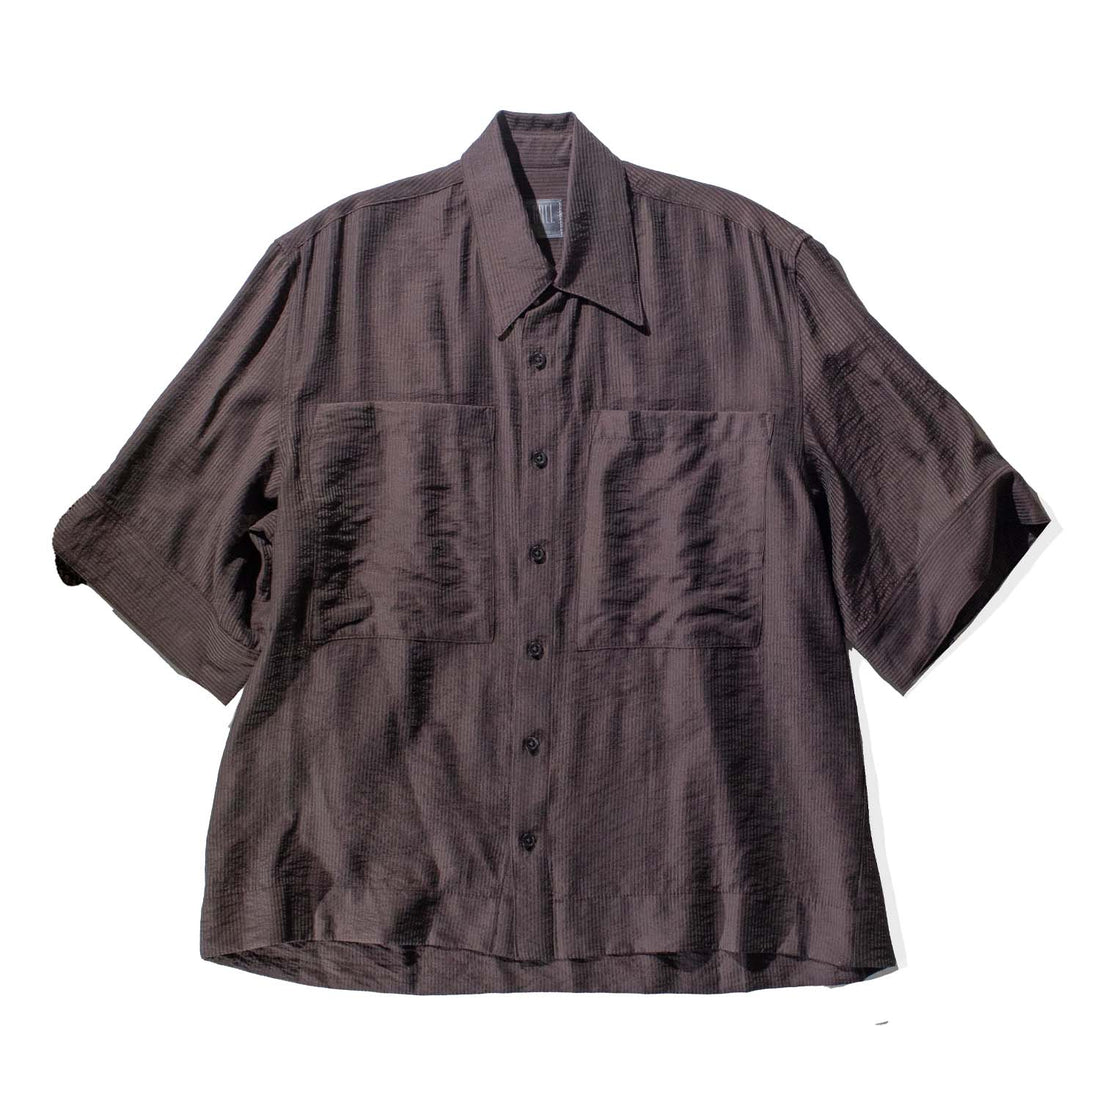 Grei S/S Modernist Shirt in Brown-Olive